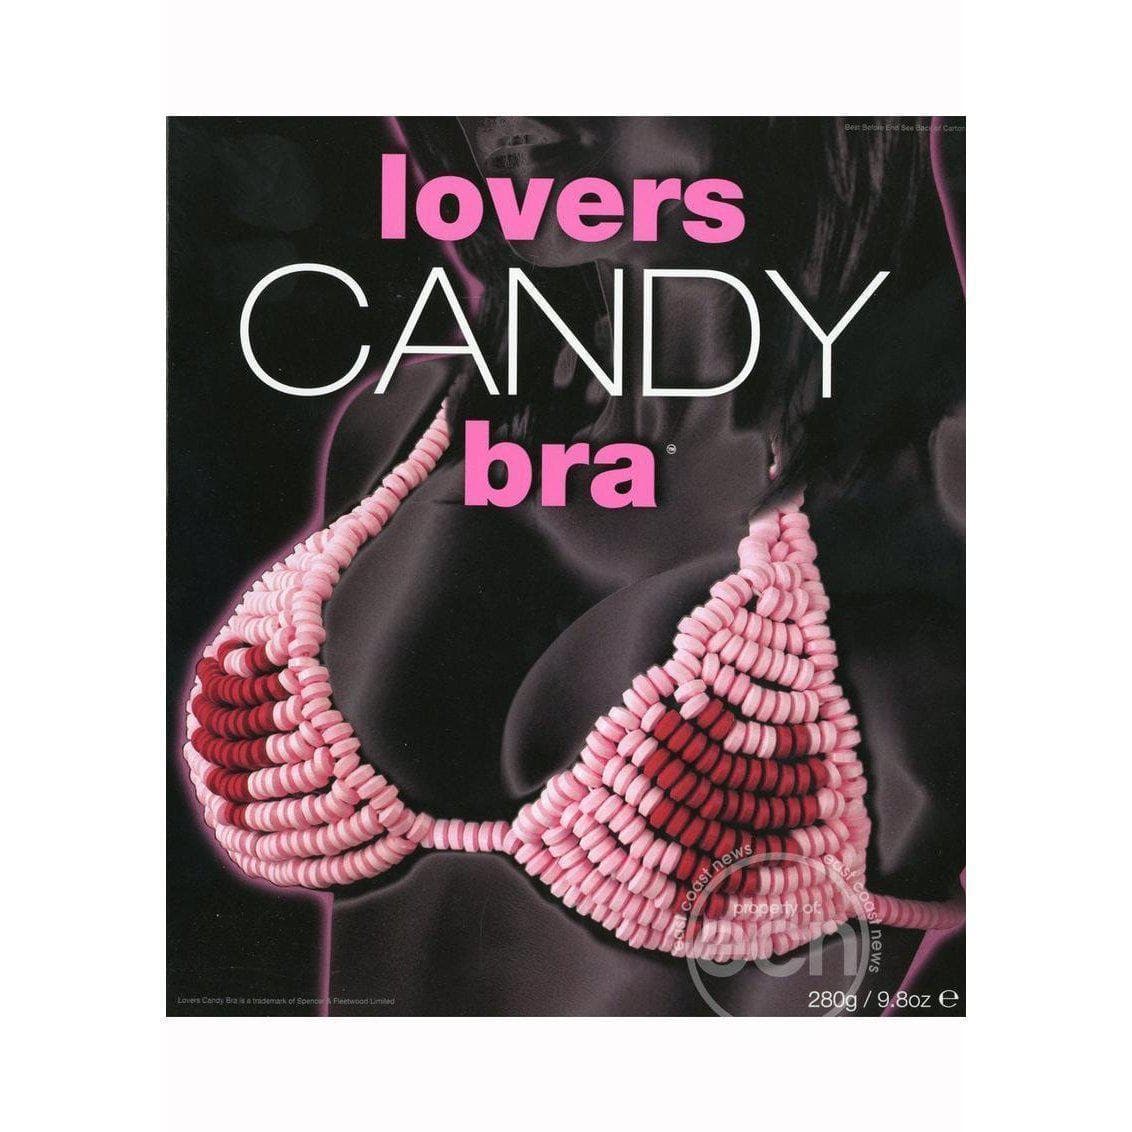 2 pair of edible underwear UNISEX in a life saver sleeve - please choose  your flavor